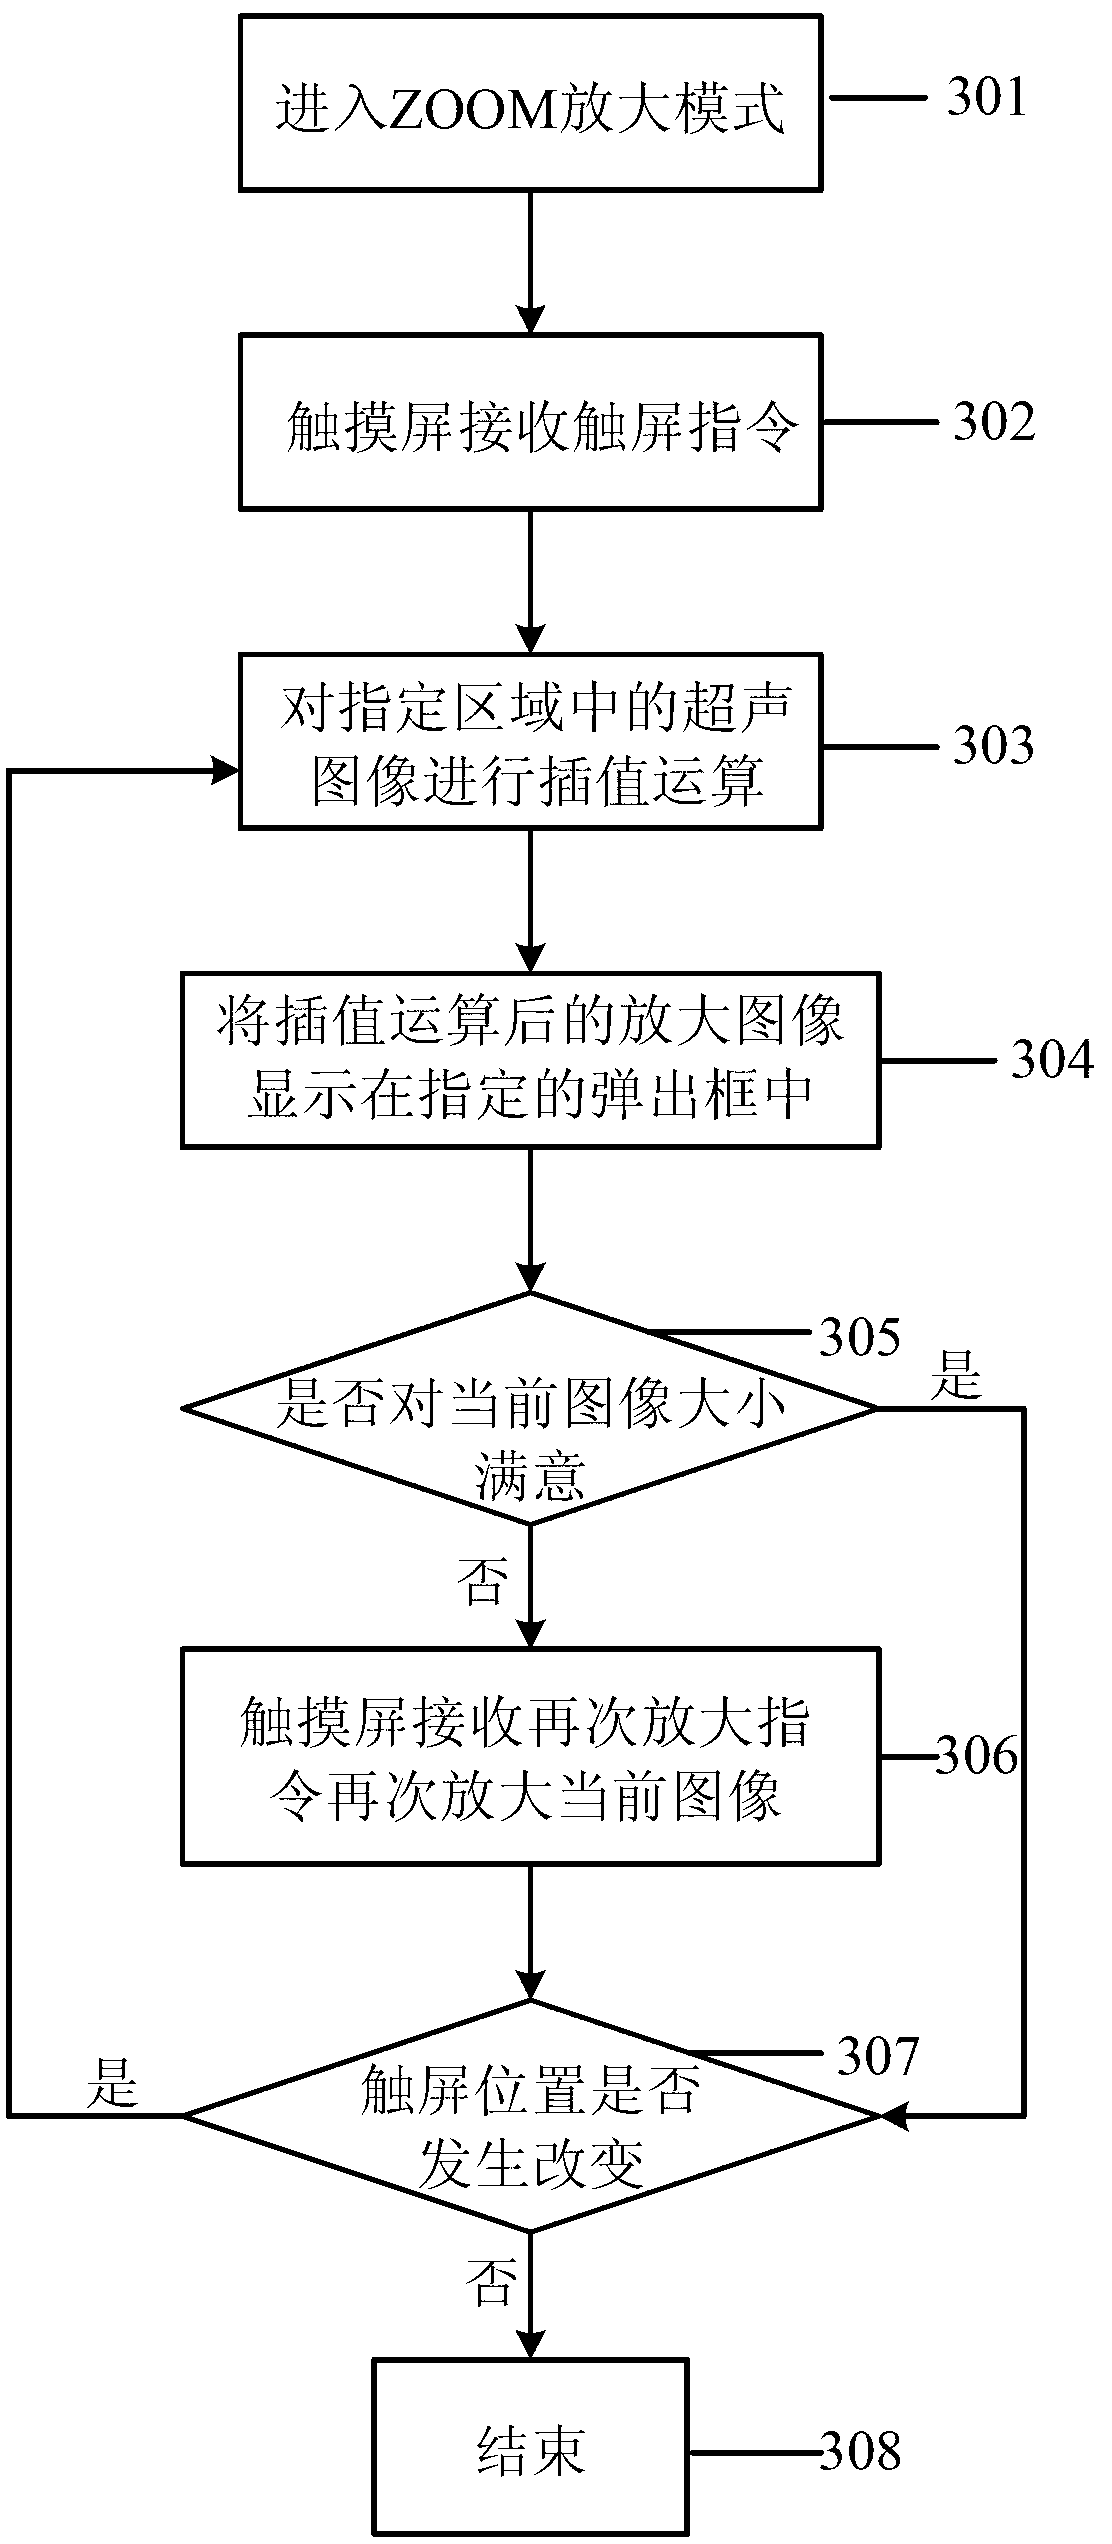 Image local amplification method and device for touch screen ultrasonic diagnostic apparatus